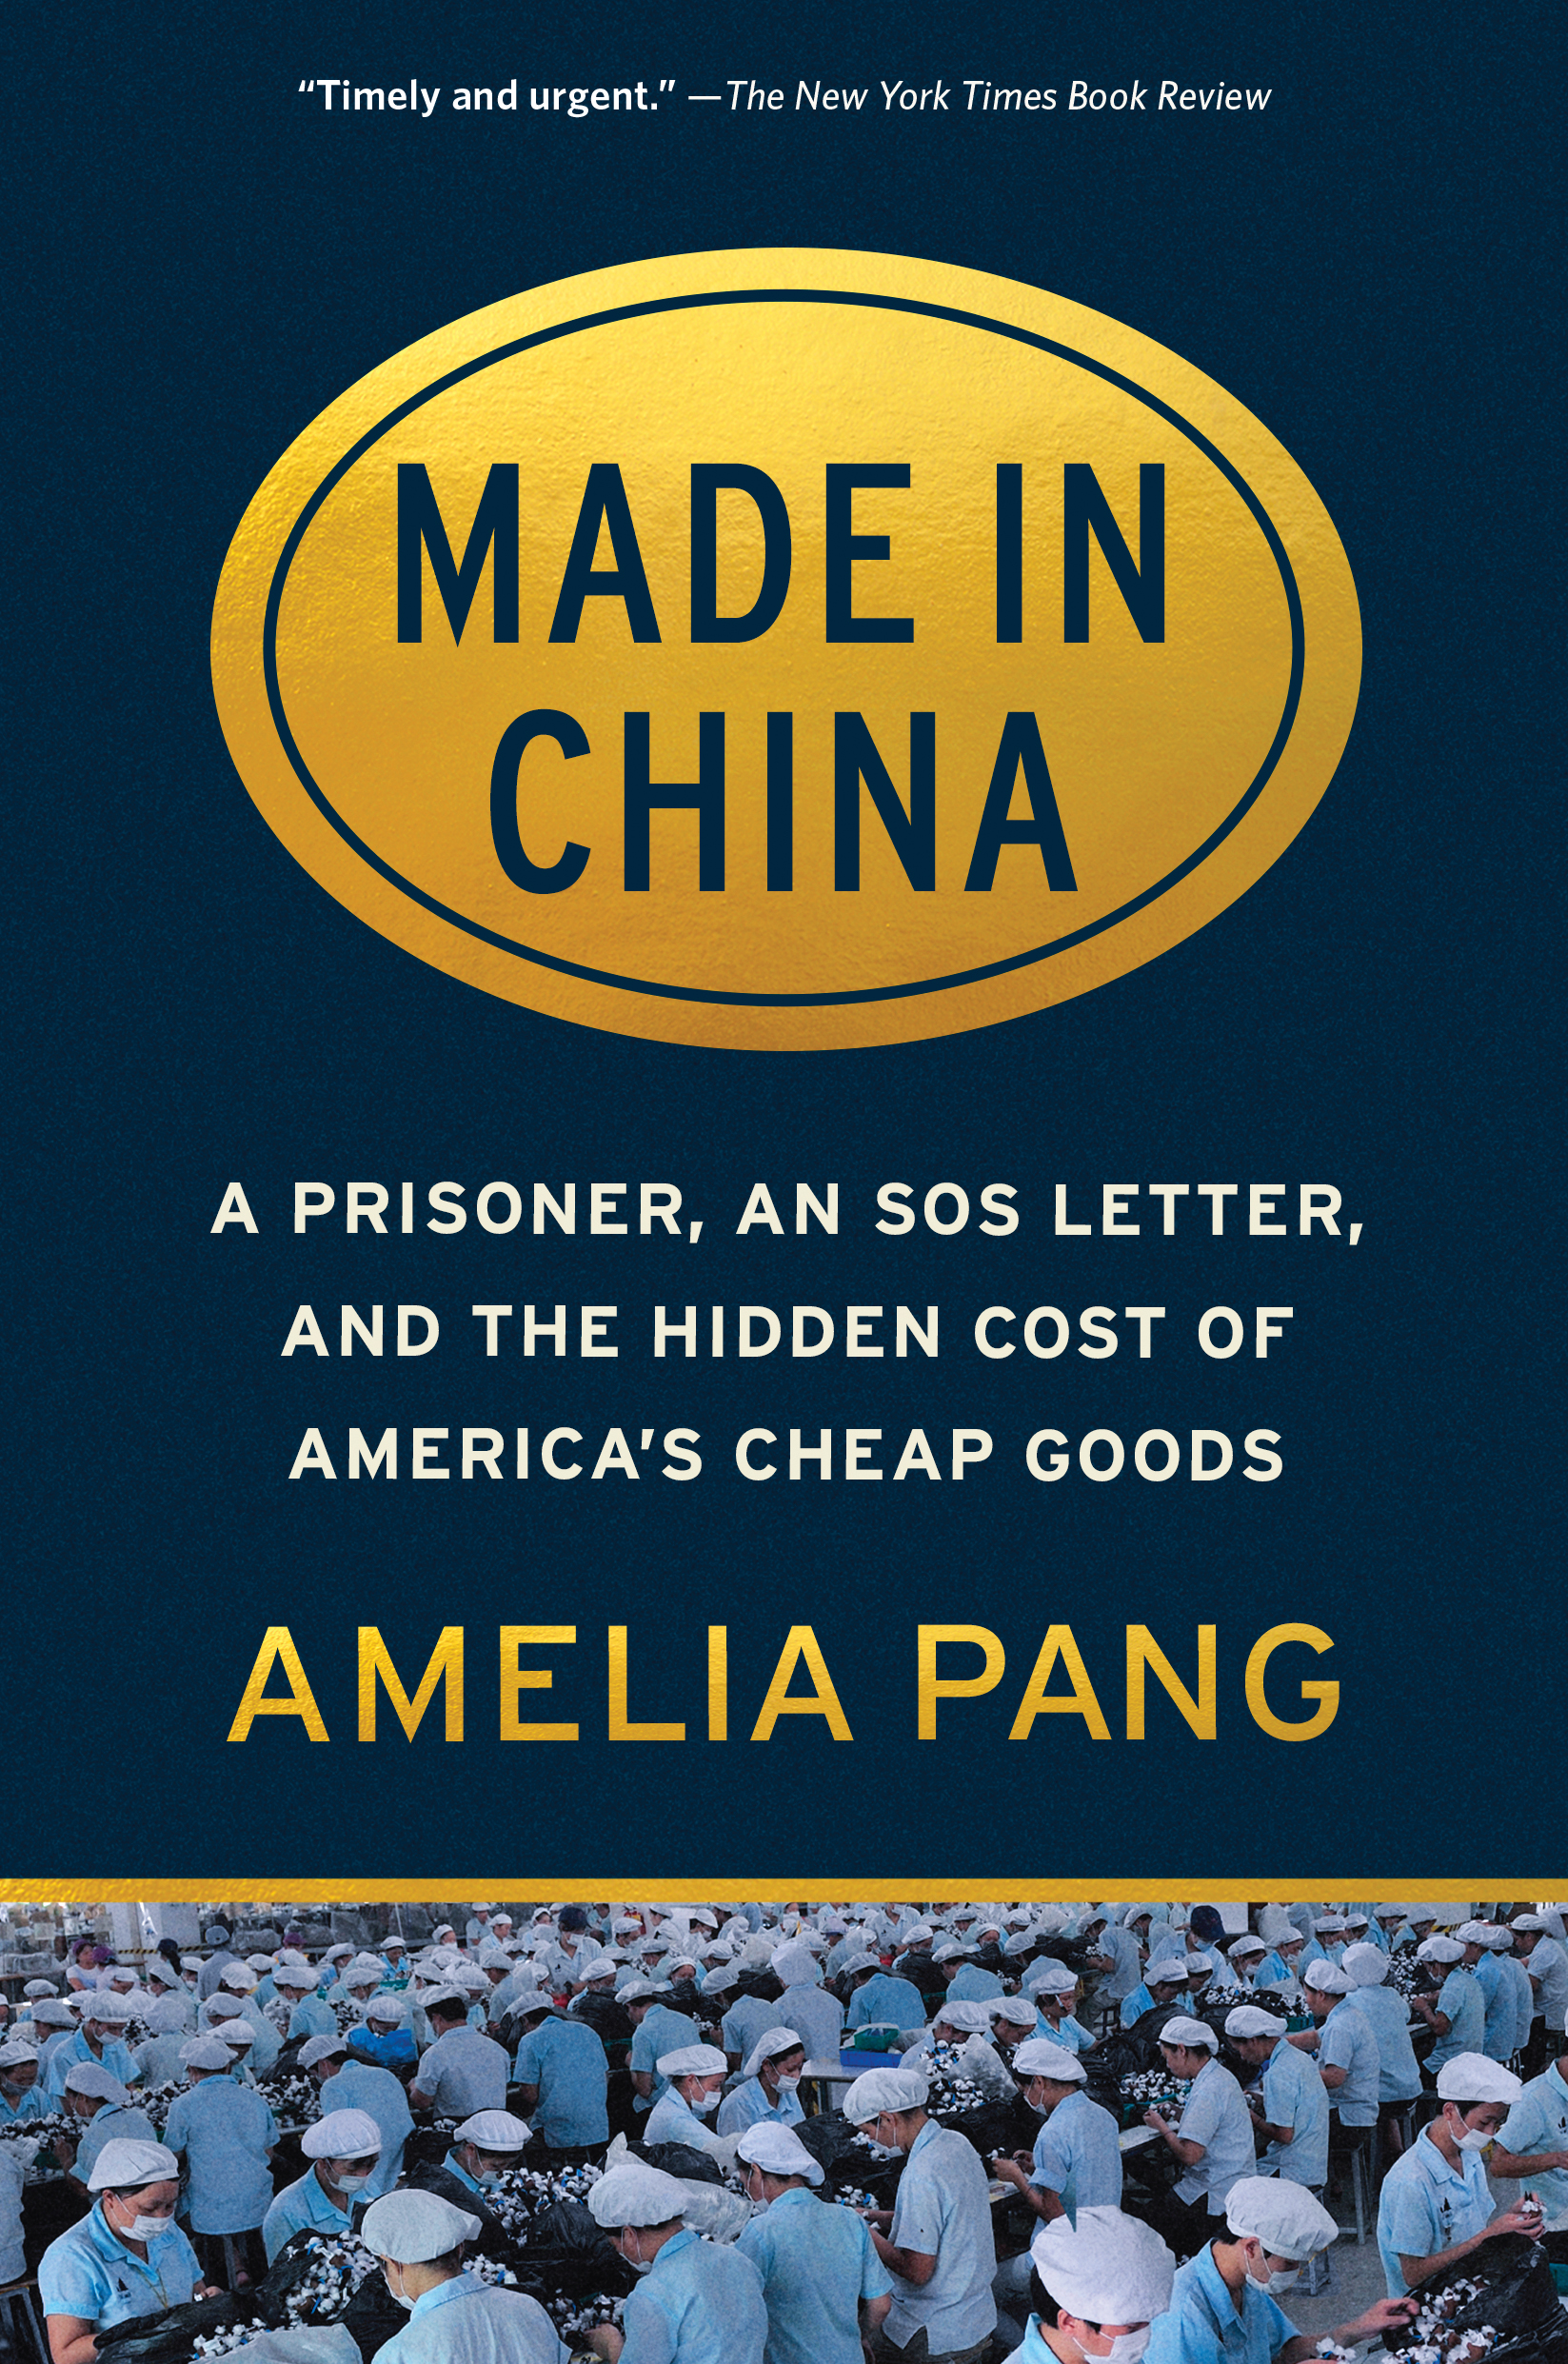 Made in China by Amelia Pang Hachette Book Group pic